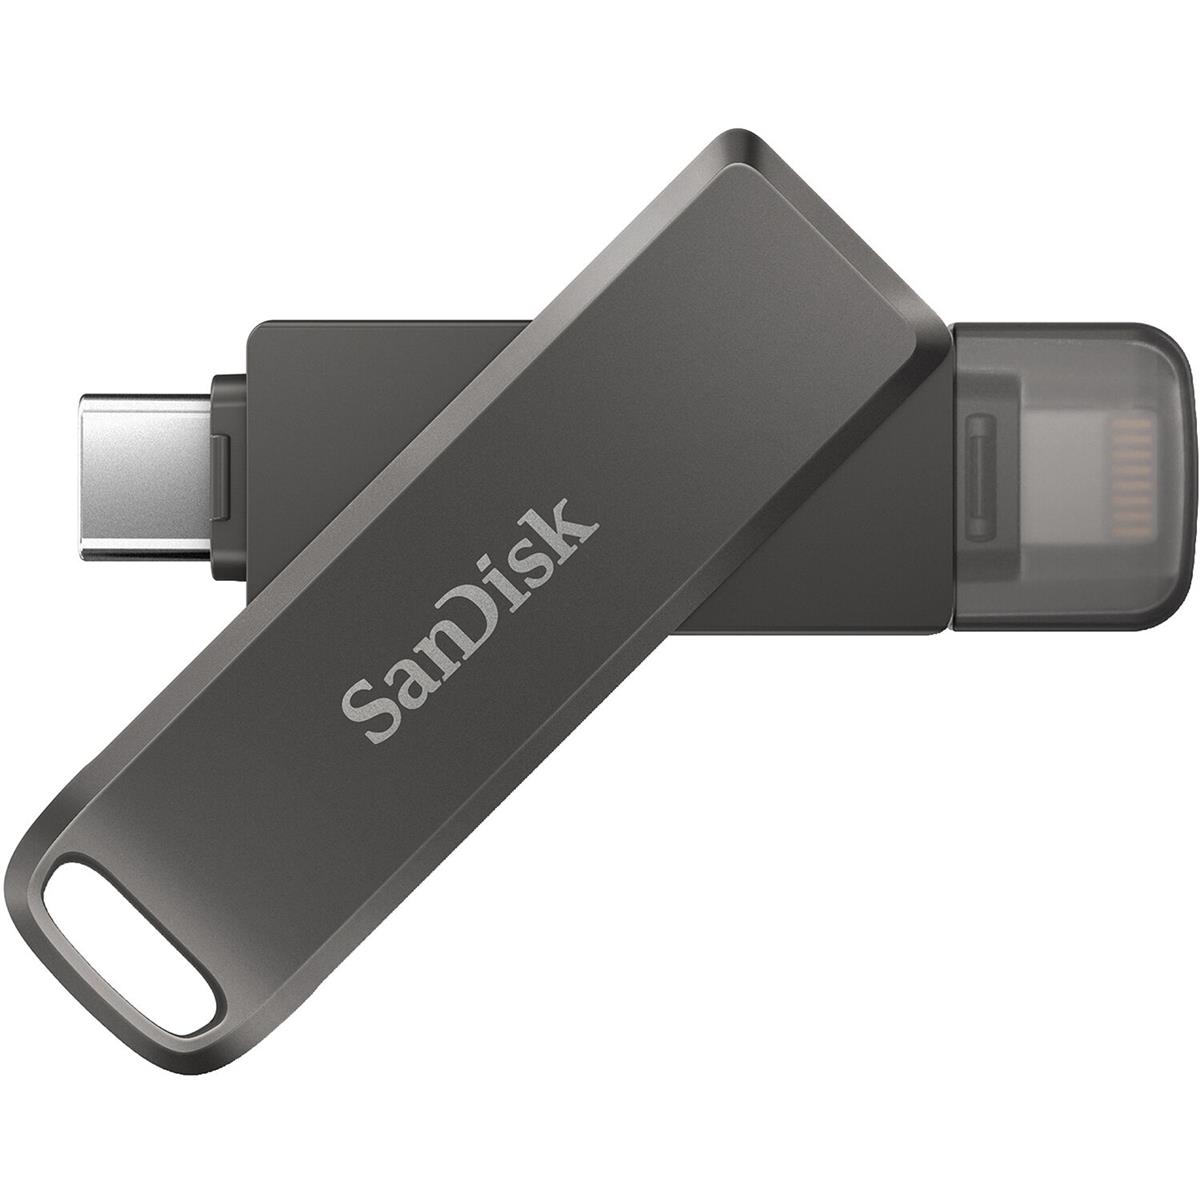 Image of SanDisk iXpand Luxe 128GB Flash Drive